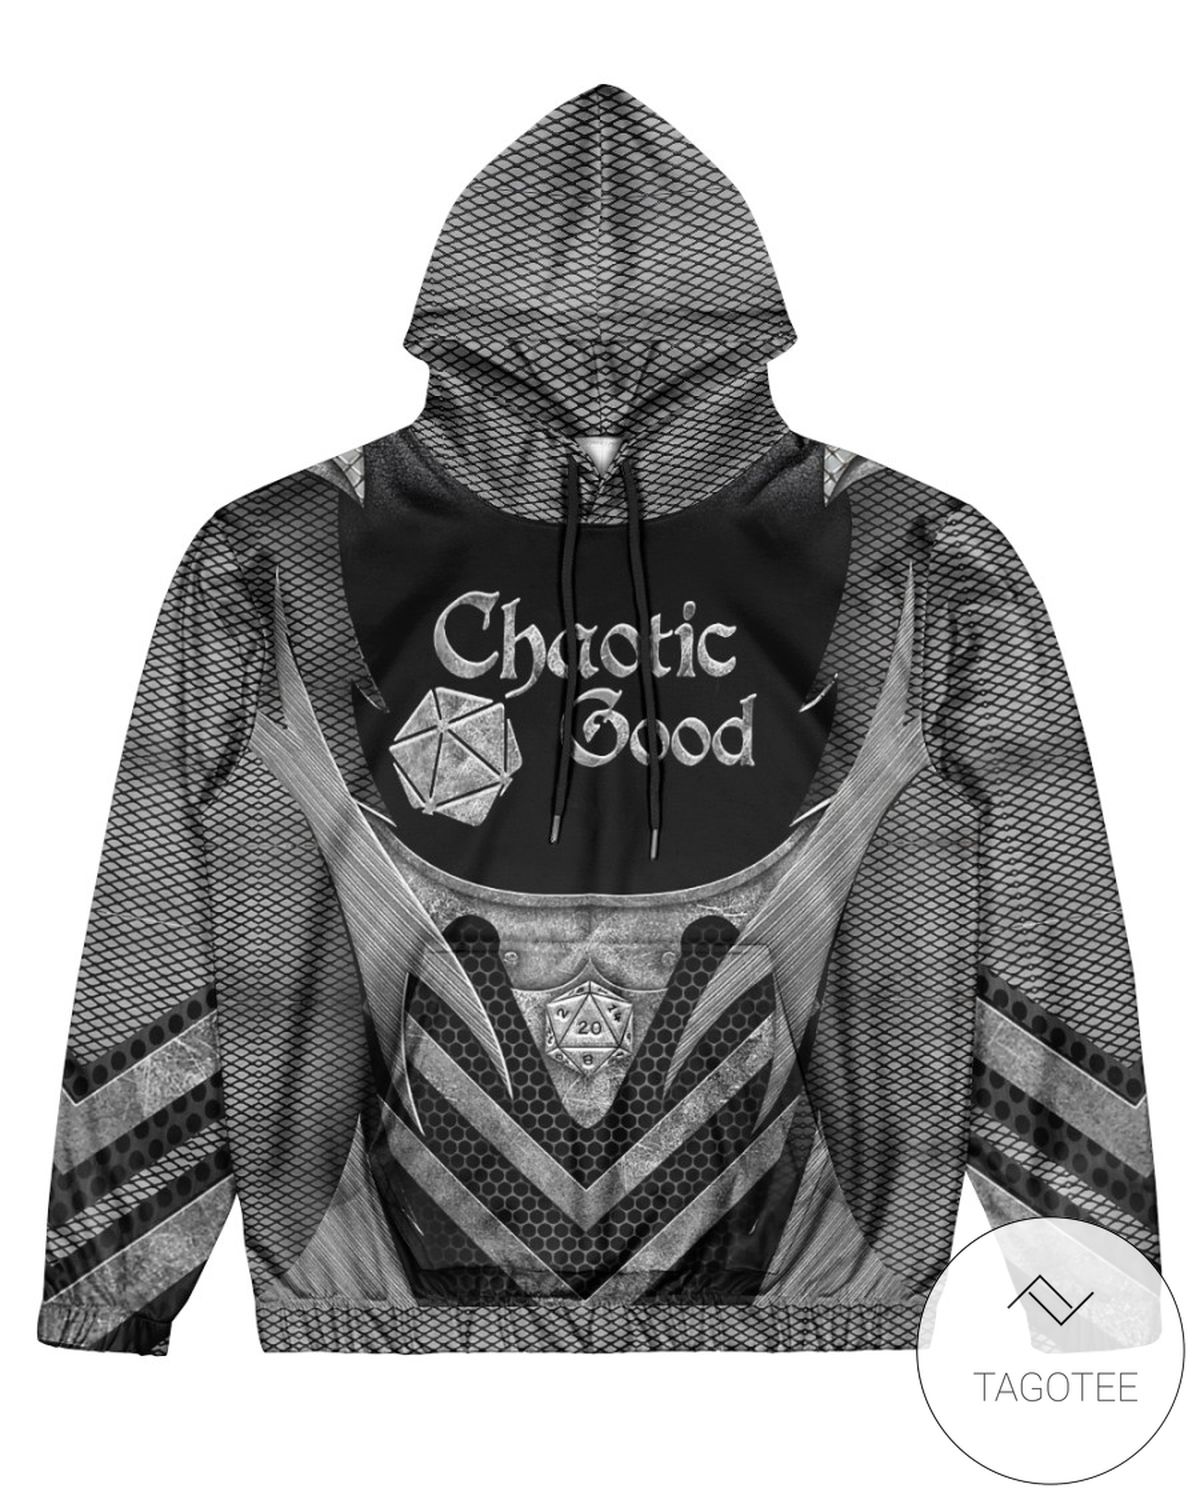 Chaotic Good Black DnD Dungeons And Dragons 3d Hoodie